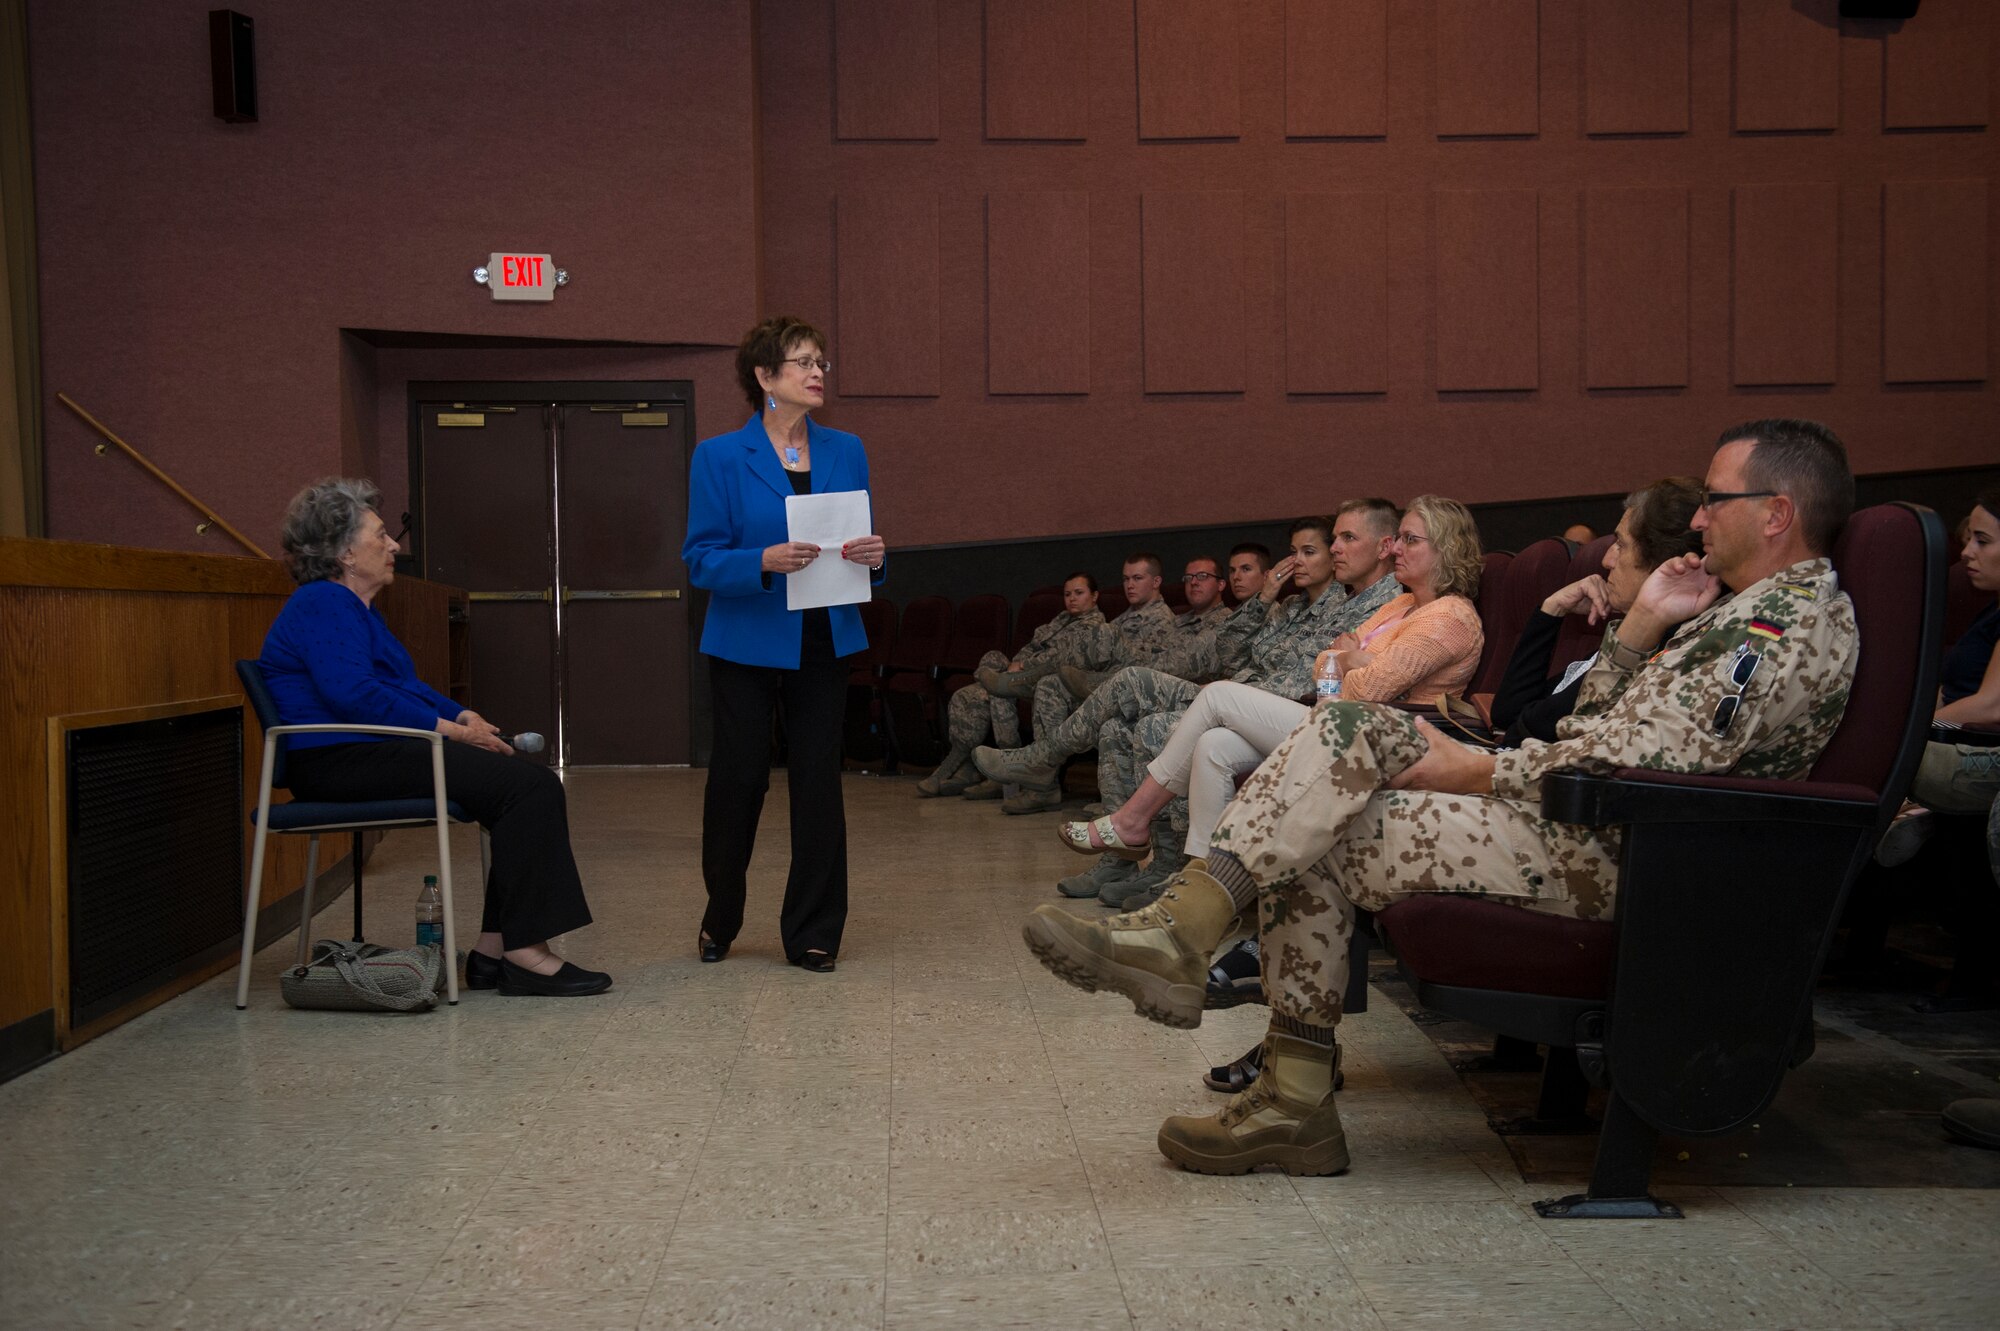 Dr. Gail Wallen, founder and director of the military holocaust education program and her guest, Lily Brull, a Holocaust survivor deliver information and life stories about experiences from the Holocaust at Holloman Air Force Base, N.M., April 21, 2015. The German Air Force and Holloman invited Wallen, Brull and Theresa Dulgov to speak to military members and a local group of advanced placement history students from Alamogordo High School. Along with her were Theresa Dulgov and Lily Brull, both Holocaust survivors. (U.S. Air Force photo by Airman 1st Class Aaron Montoya / Released)